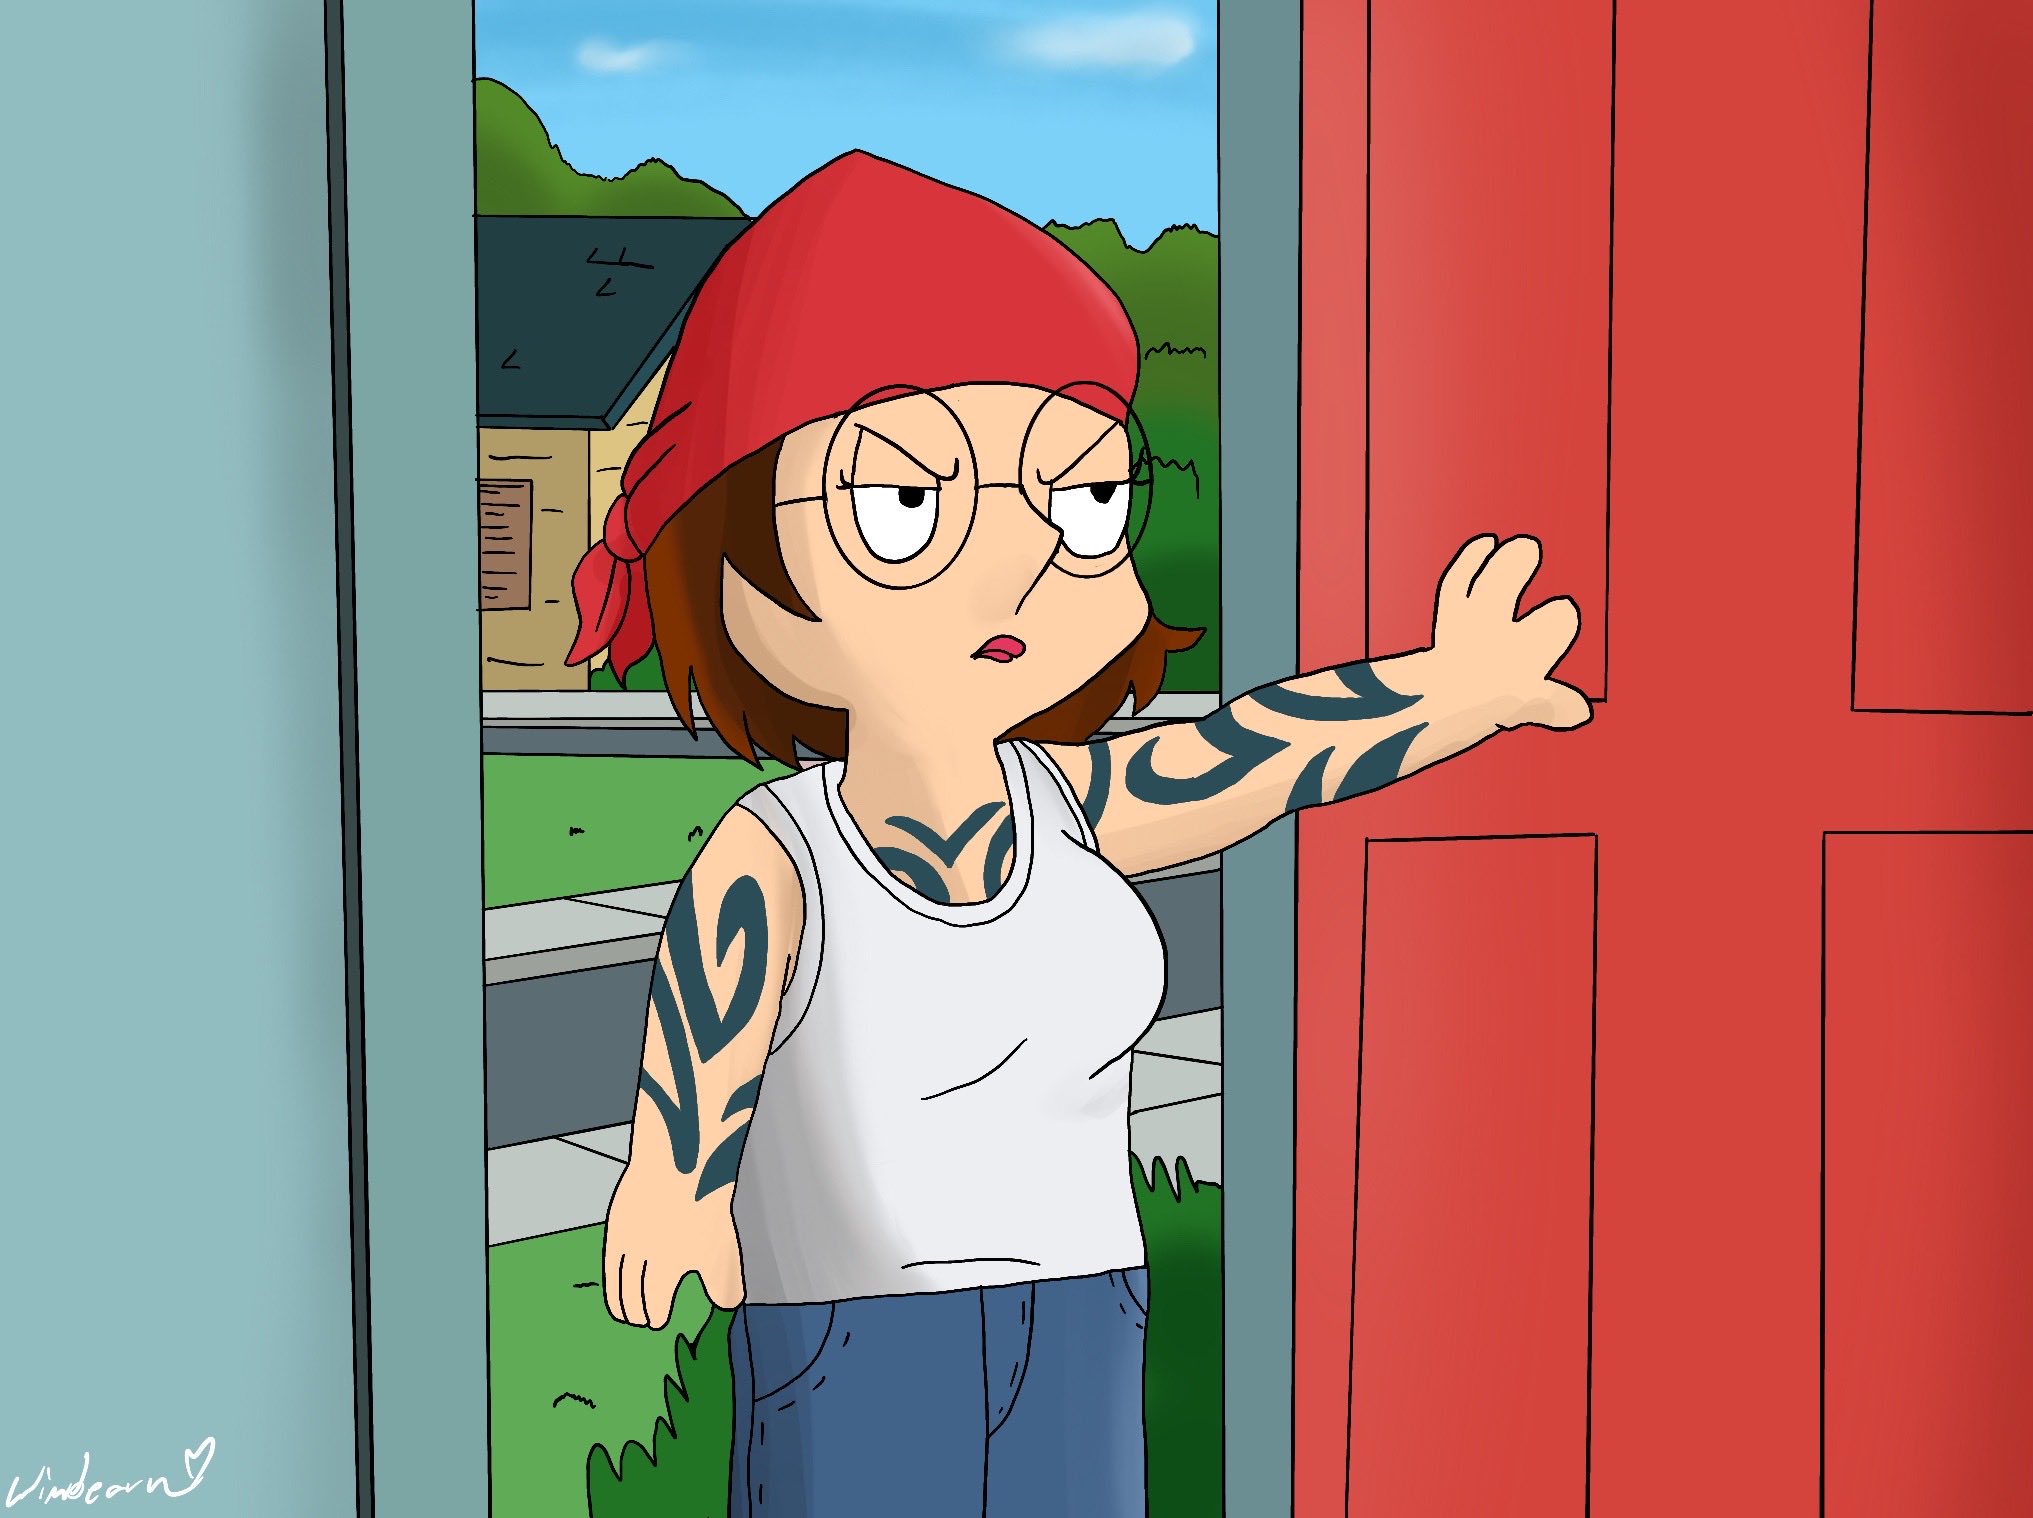 Meg Griffin Redraw.

And happy late birthday to her voice actress, Mila Kunis. 